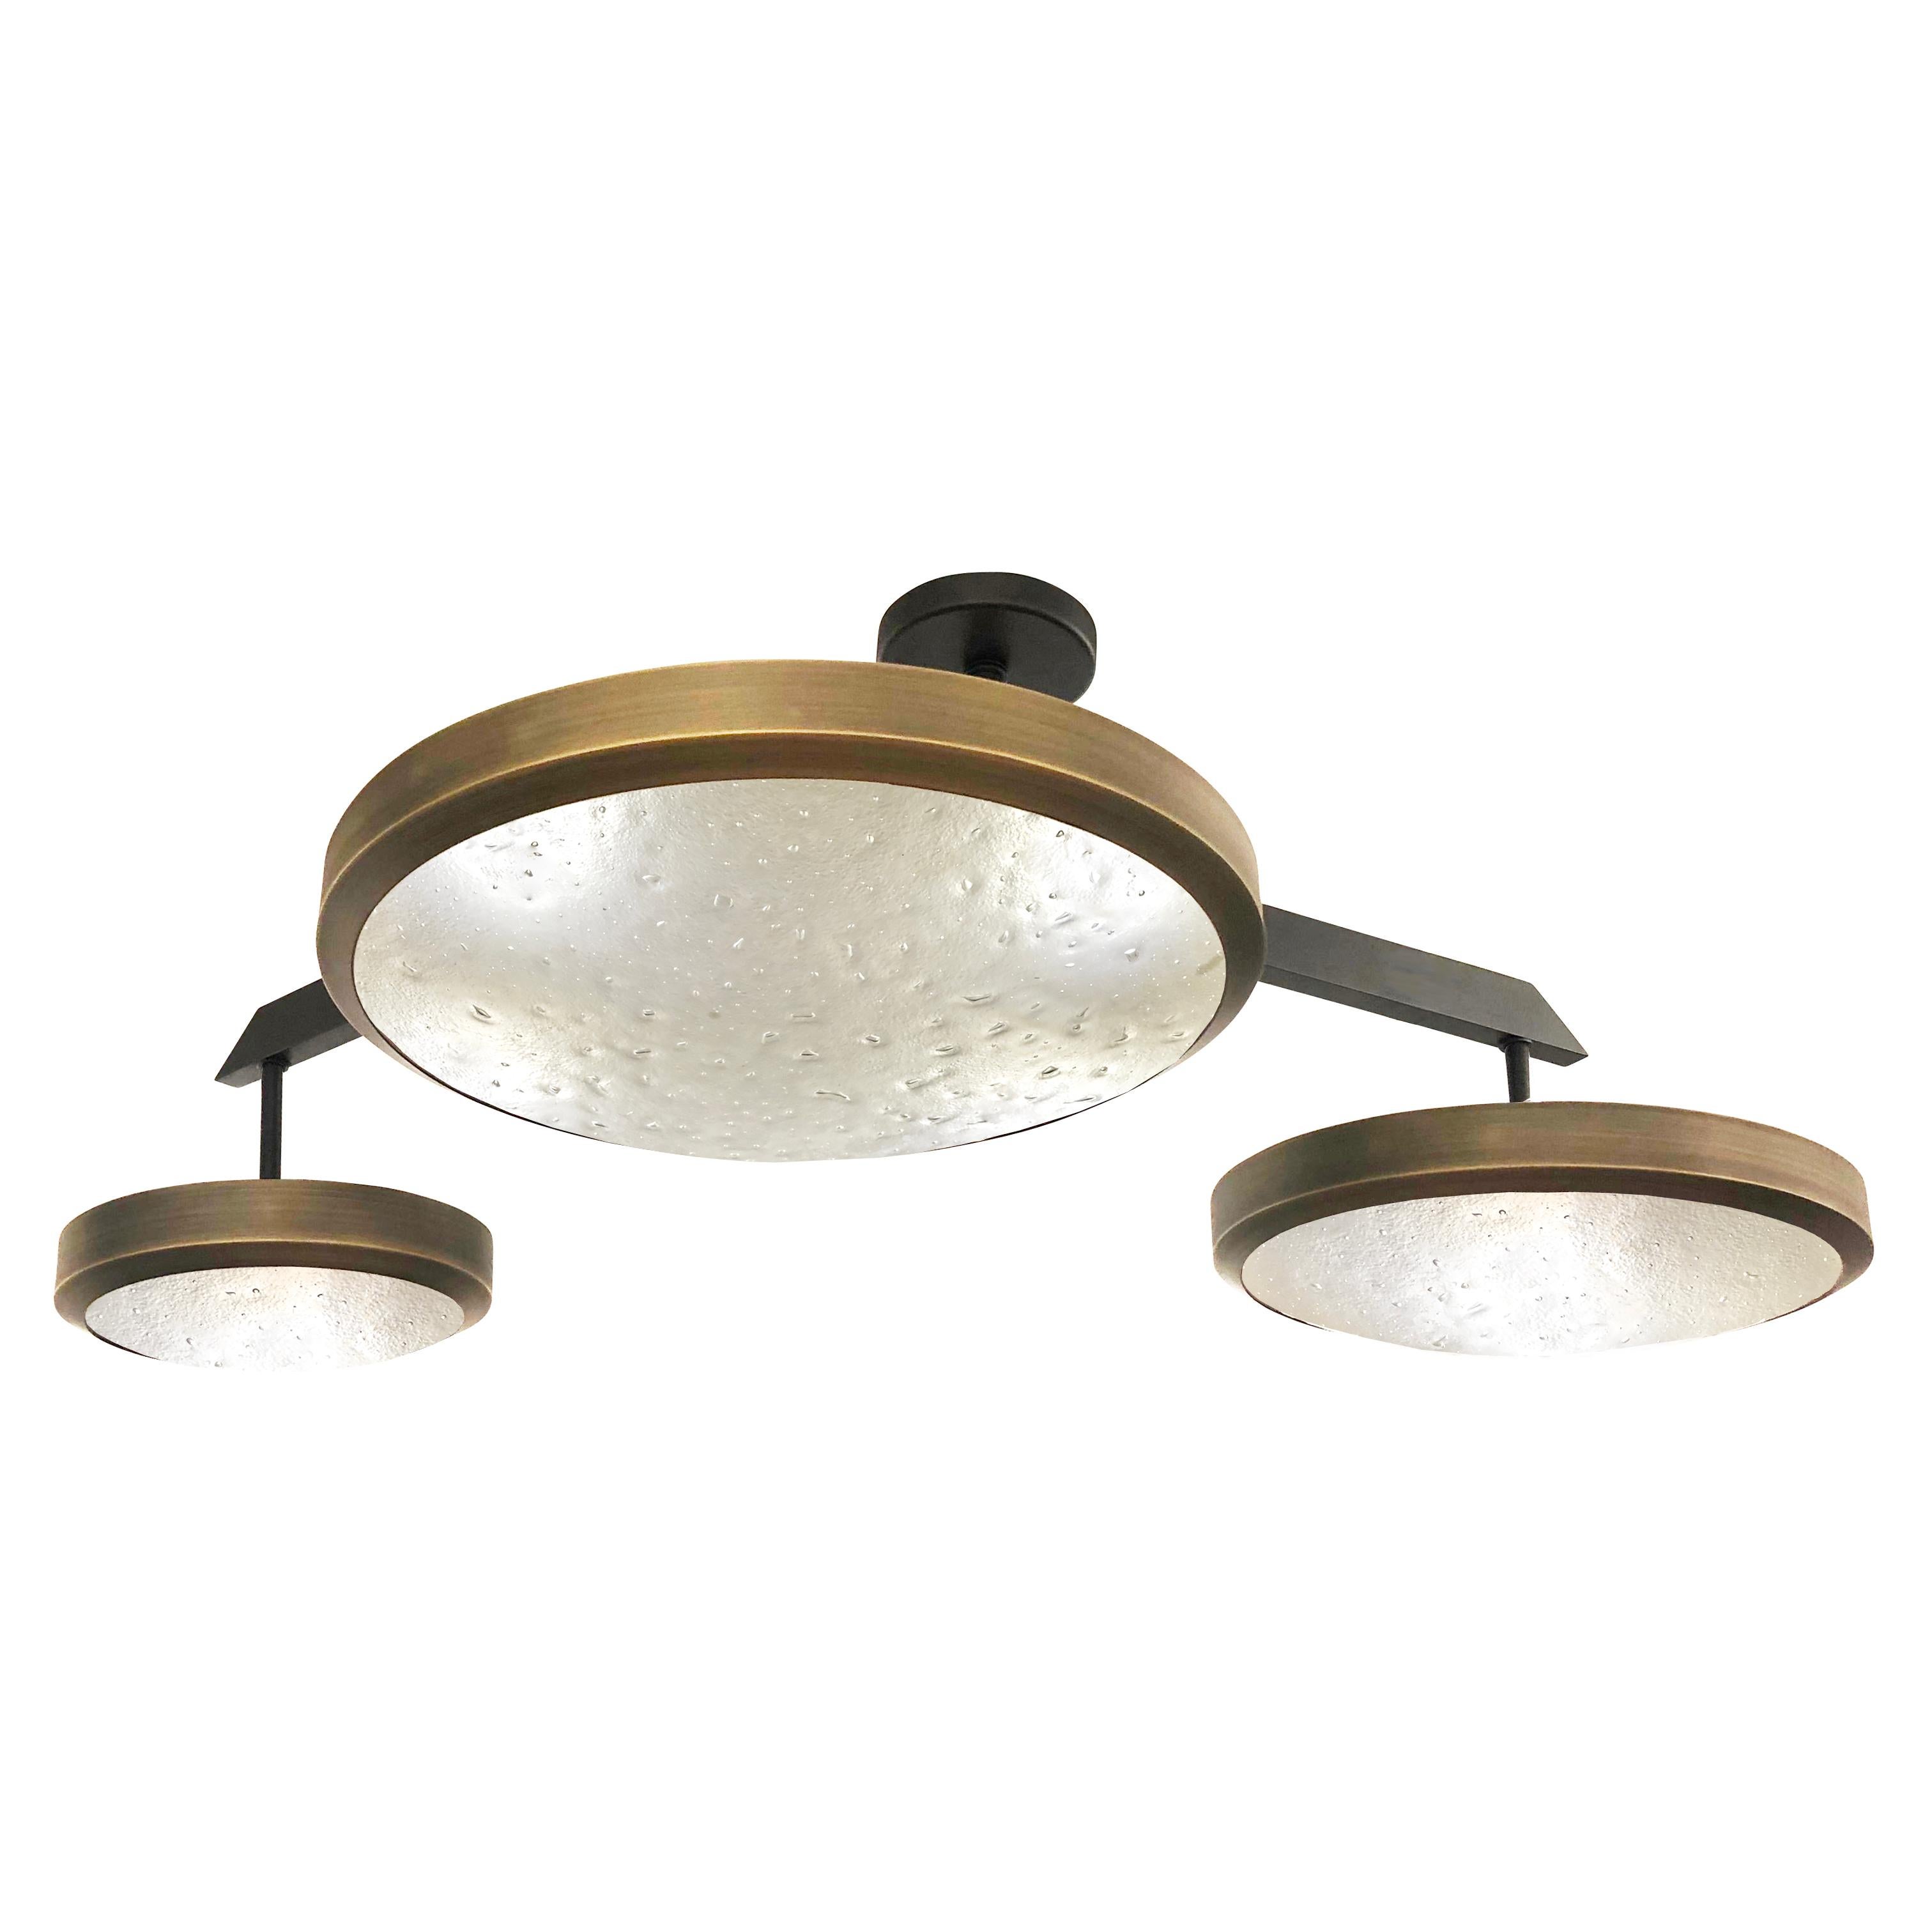 The “Zeta” ceiling light is the fourth model from the Geometria Sospesa series designed by formA by Gaspare Asaro. It’s composed of three variable dimension glass saucers on a V shaped frame. The limited edition model shown comes with dark bronze